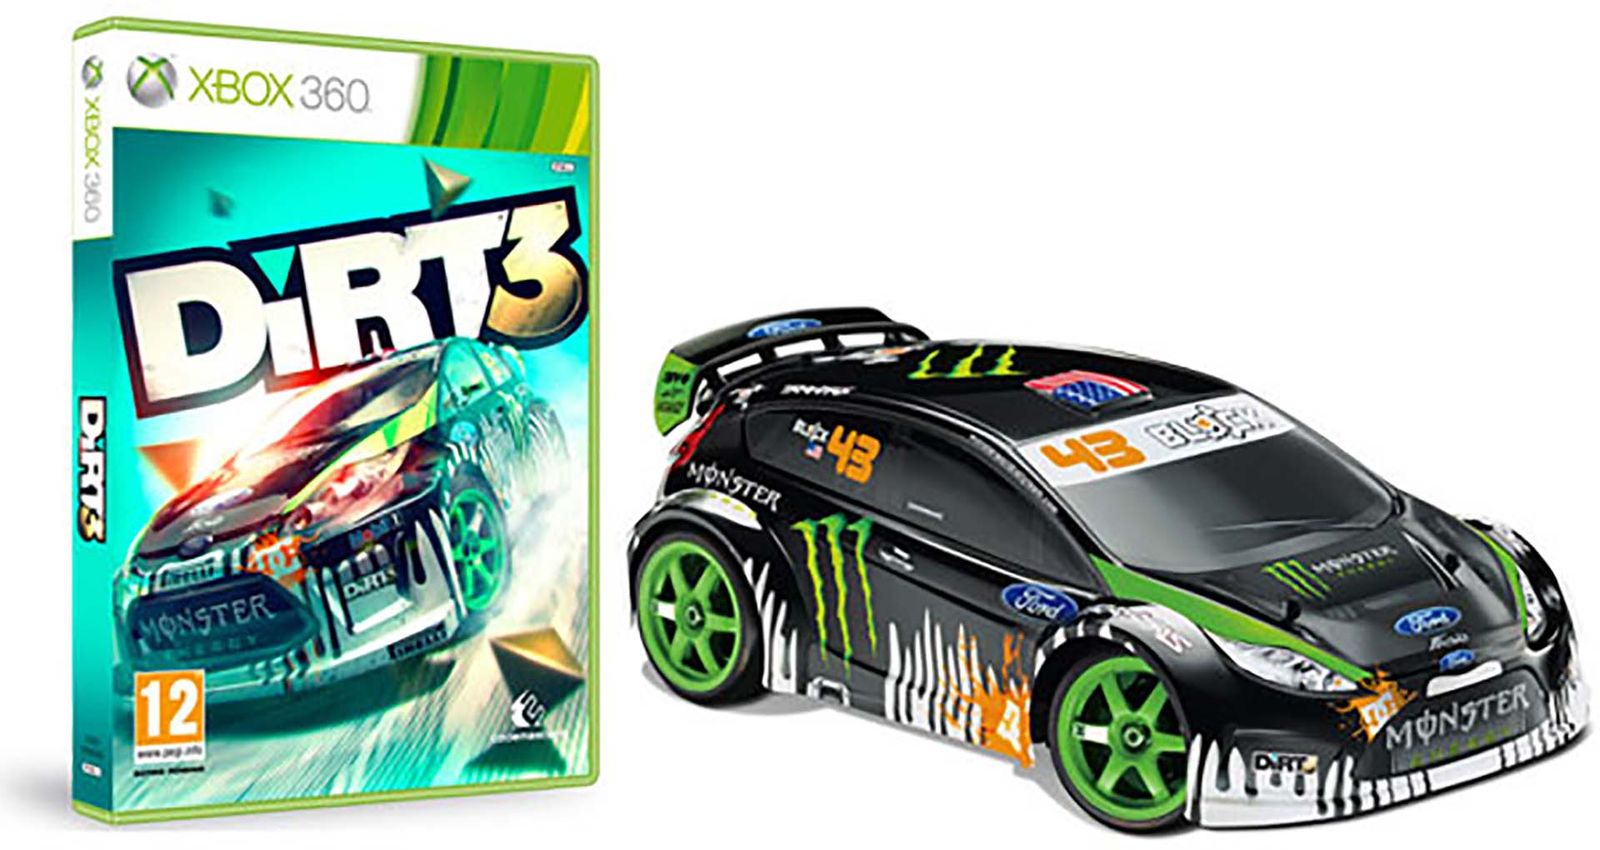 DiRT 3 Collector's Edition